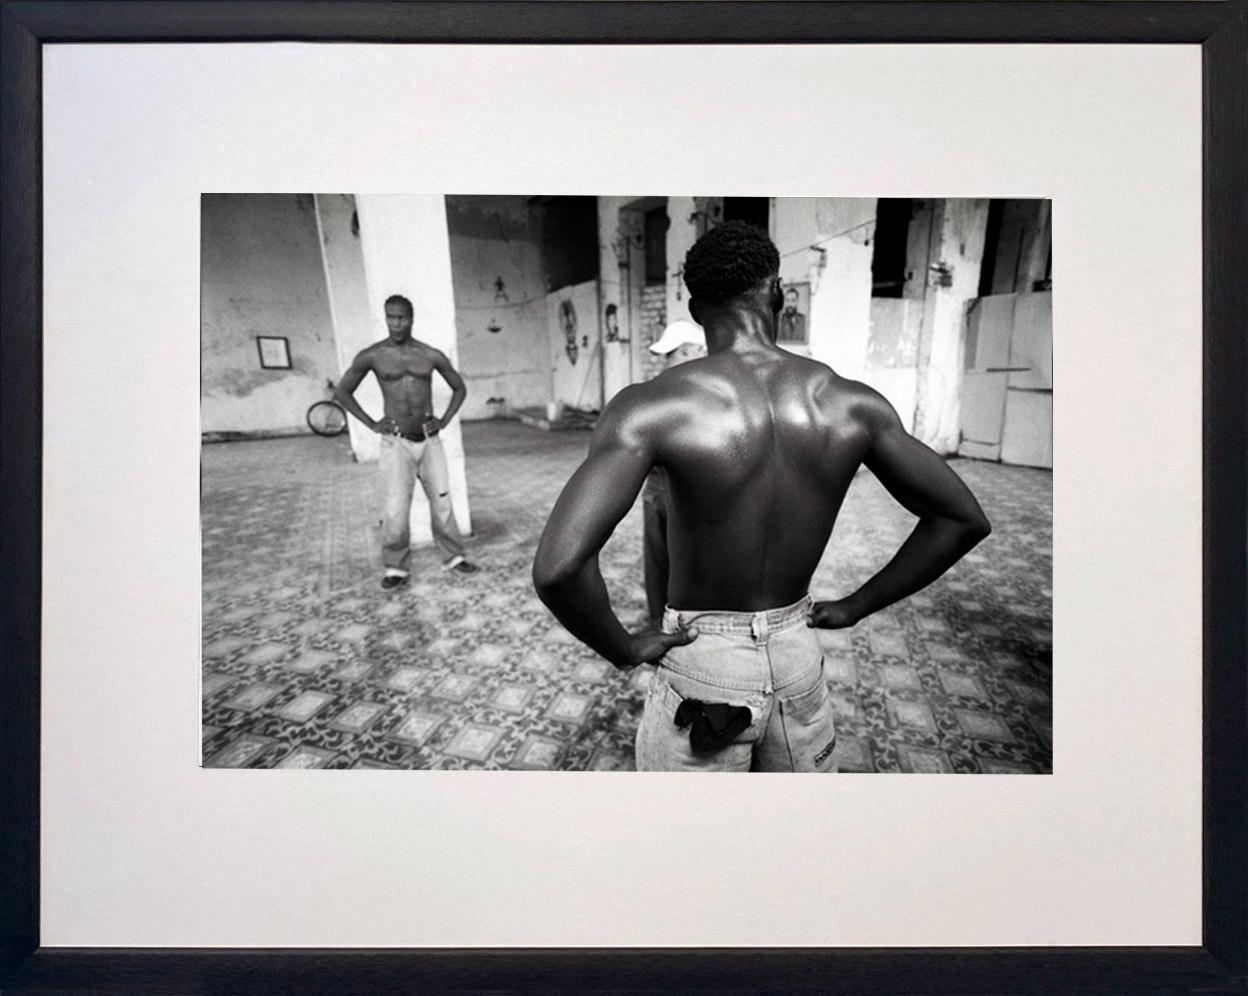 The sculpted bodies of two dancers during a rehearsal in Santiago de Cuba…

James Sparshatt’s photographs of music and dance capture the emotion and intensity of people.

The work is available as silver gelatin and palladium platinum